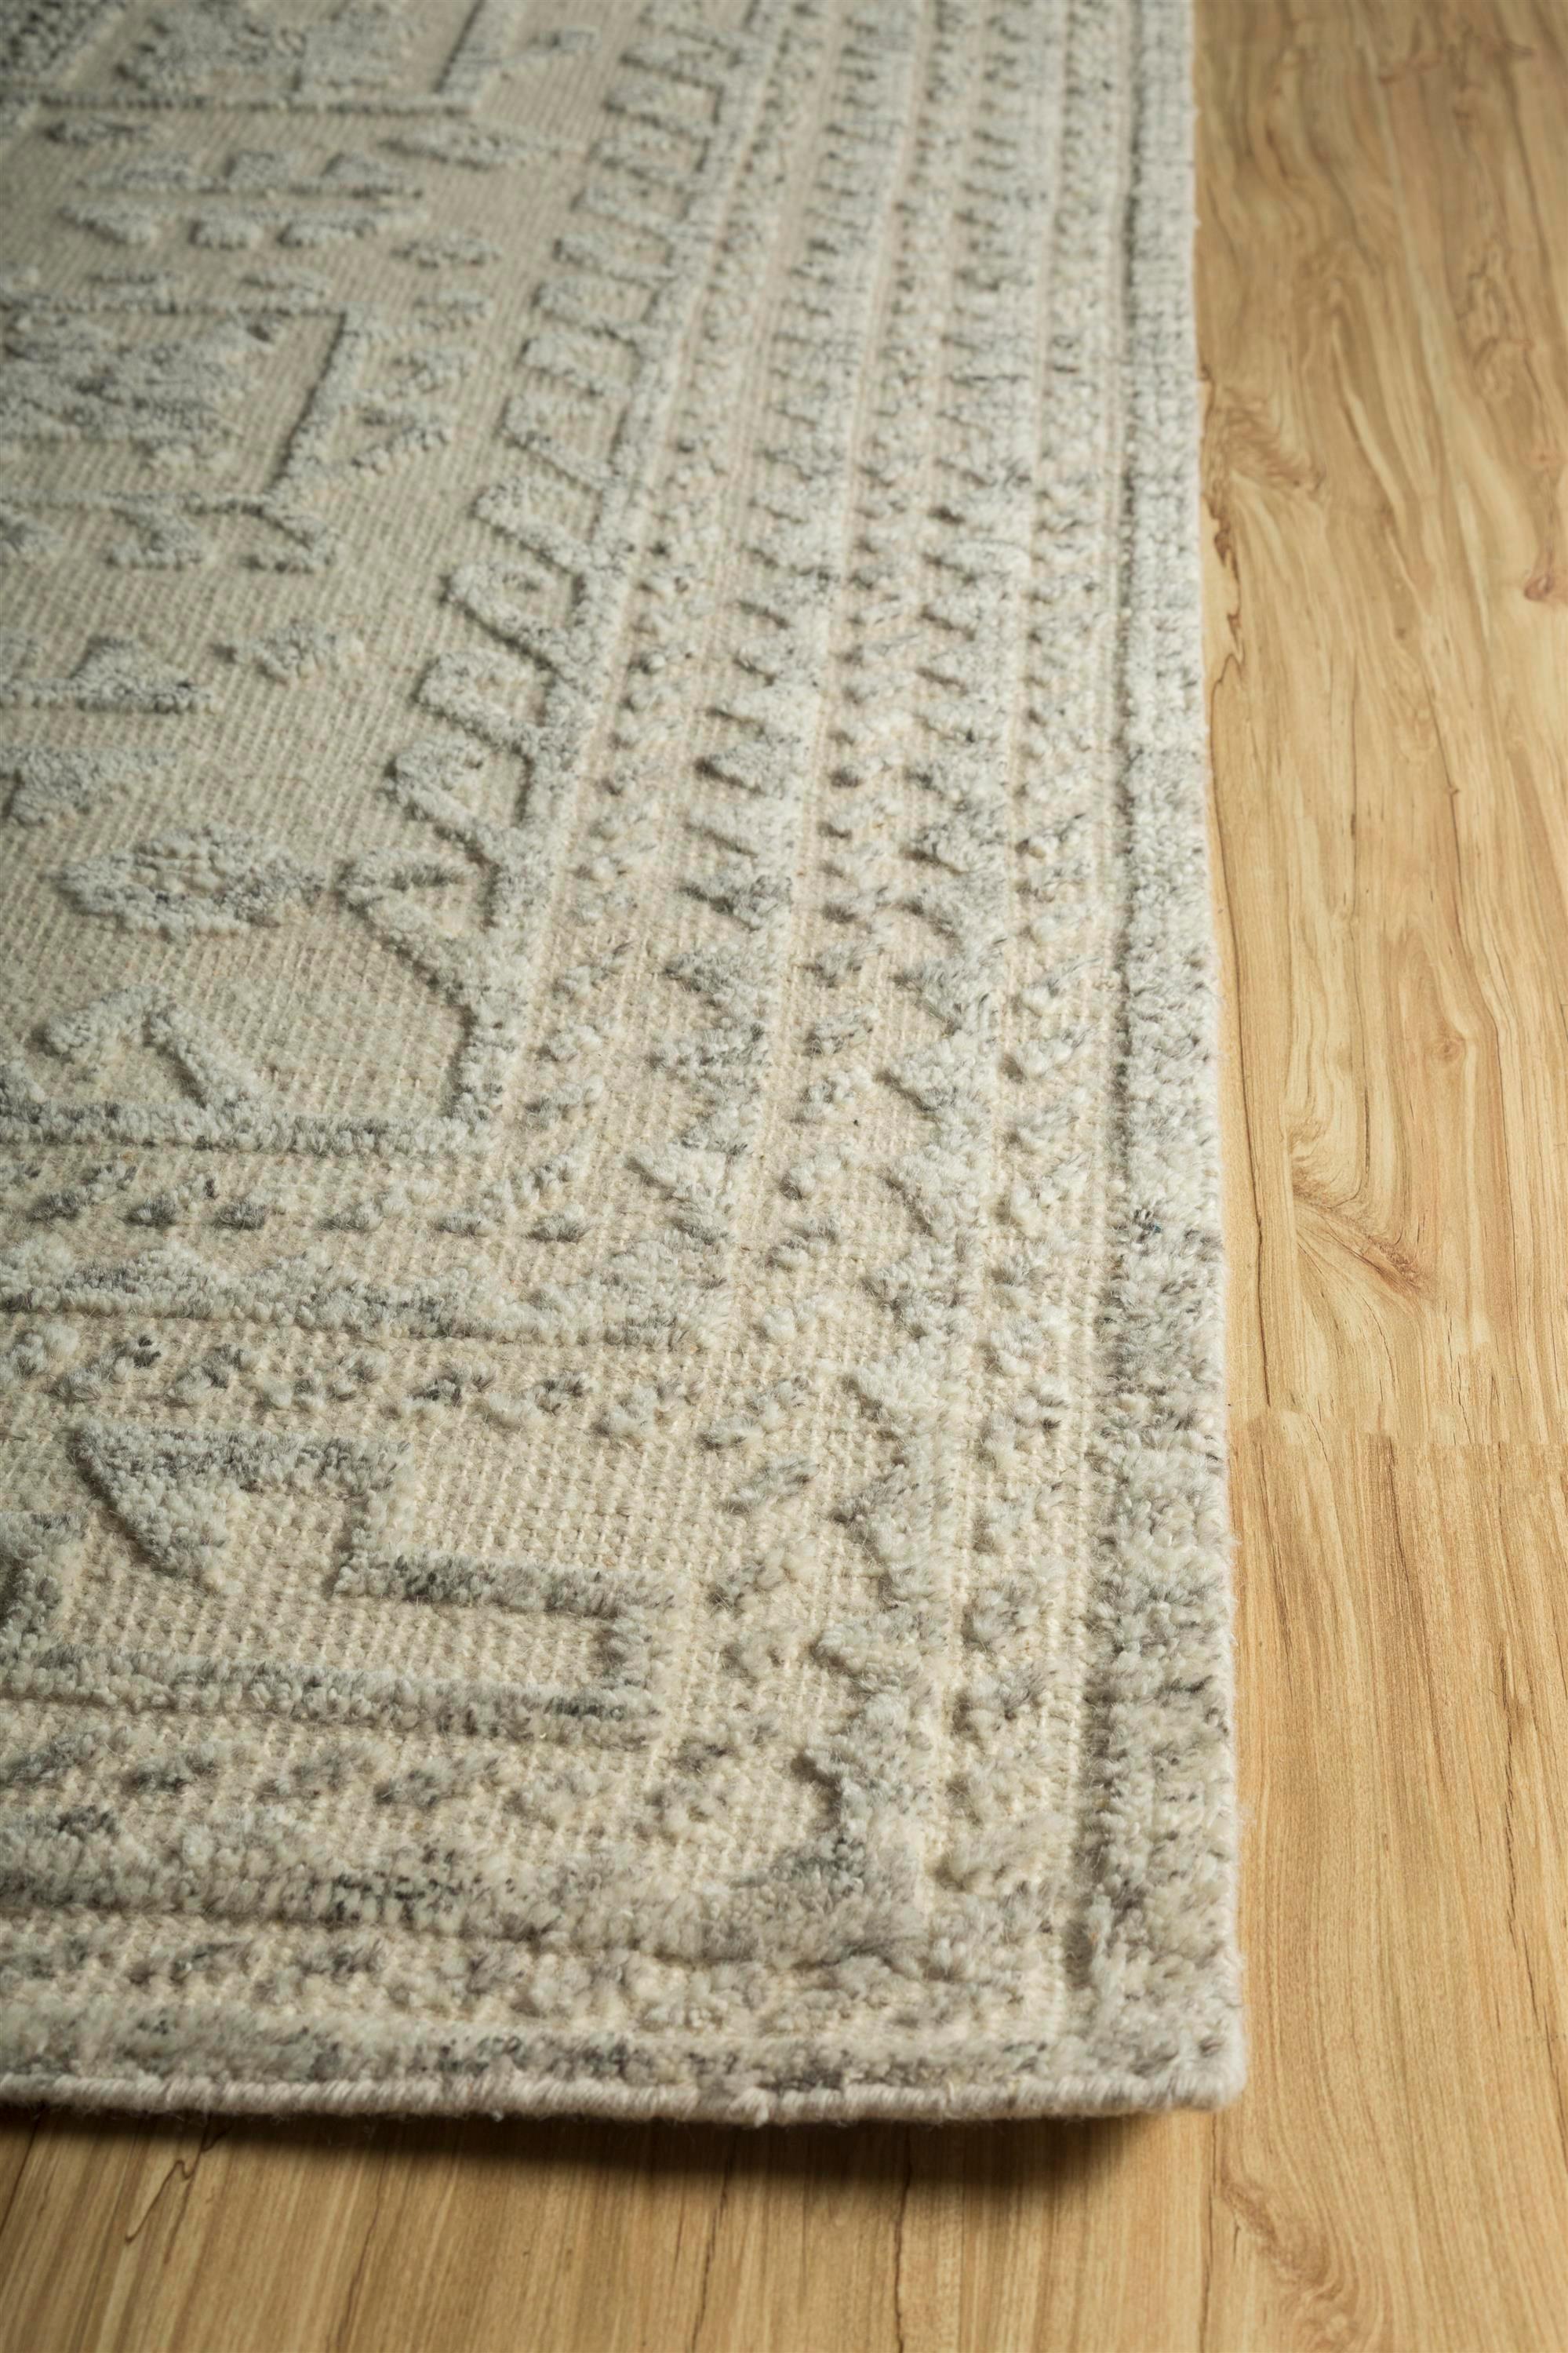 Introducing this luxury rug from our Manifest collection seamlessly blends elegance with natural allure. The rug's foundation is adorned with a soothing natural off-white hue, reminiscent of untouched snow, creating a sense of purity and